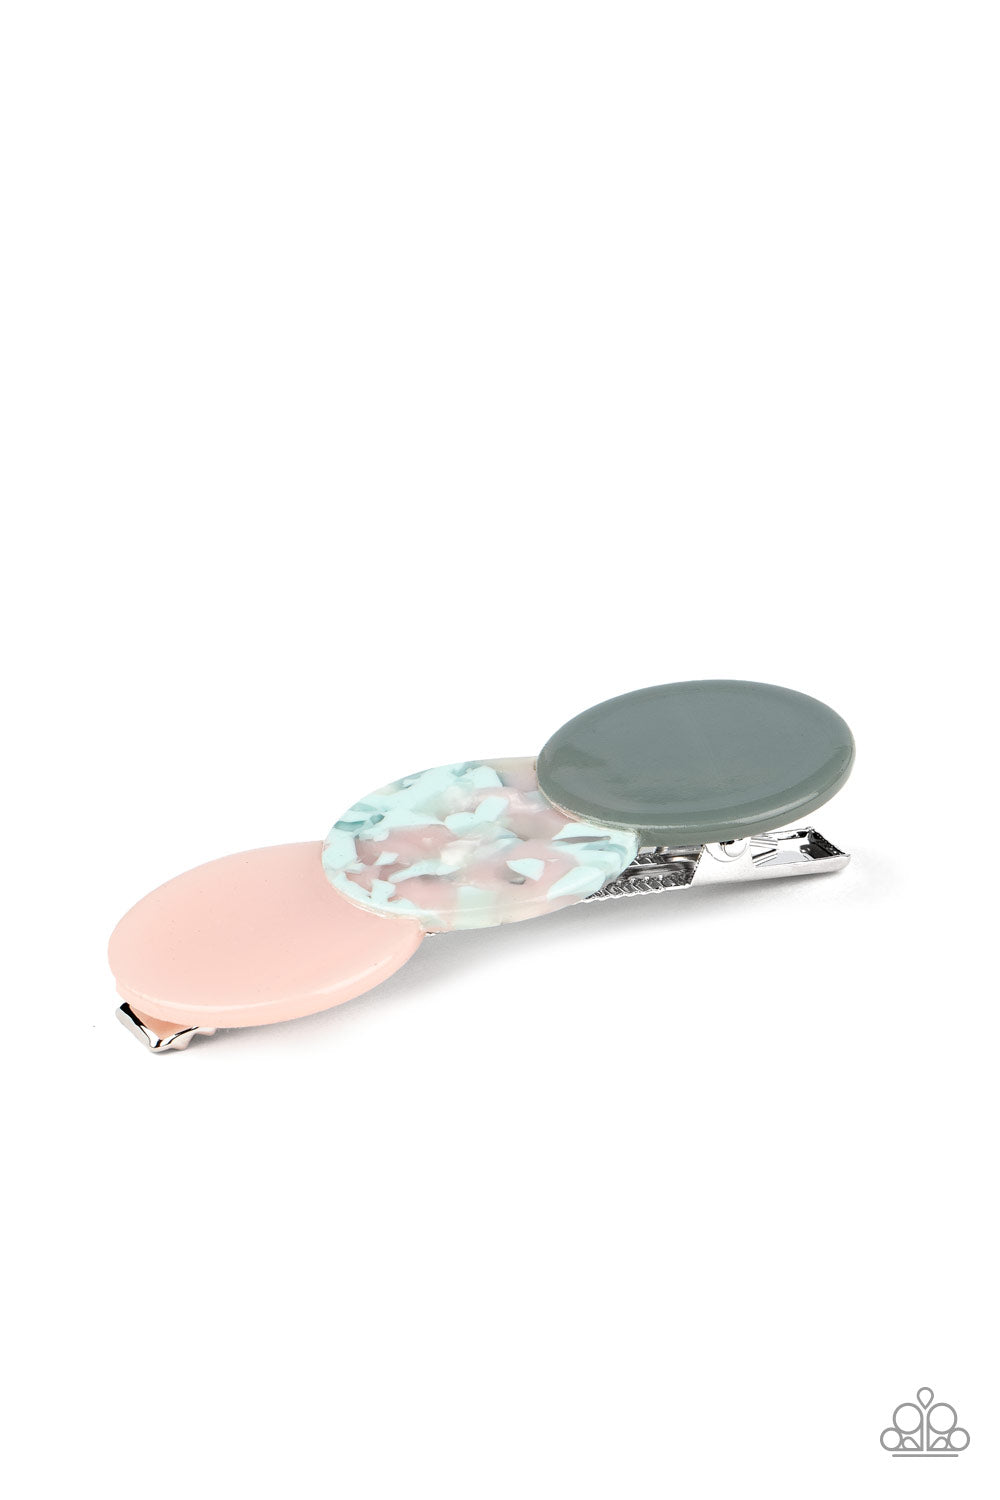 &lt;P&gt;Featuring polished and shell-like finishes, a trio of pink, blue and pink tortoise shell, and gray acrylic circles delicately overlap into a bubbly frame. Features a standard hair clip on the back.&lt;/P&gt;

&lt;P&gt;&lt;I&gt;Sold as one individual hair clip.&lt;/I&gt;&lt;/P&gt;


&lt;img src=\&quot;https://d9b54x484lq62.cloudfront.net/paparazzi/shopping/images/517_tag150x115_1.png\&quot; alt=\&quot;New Kit\&quot; align=\&quot;middle\&quot; height=\&quot;50\&quot; width=\&quot;50\&quot;/&gt;